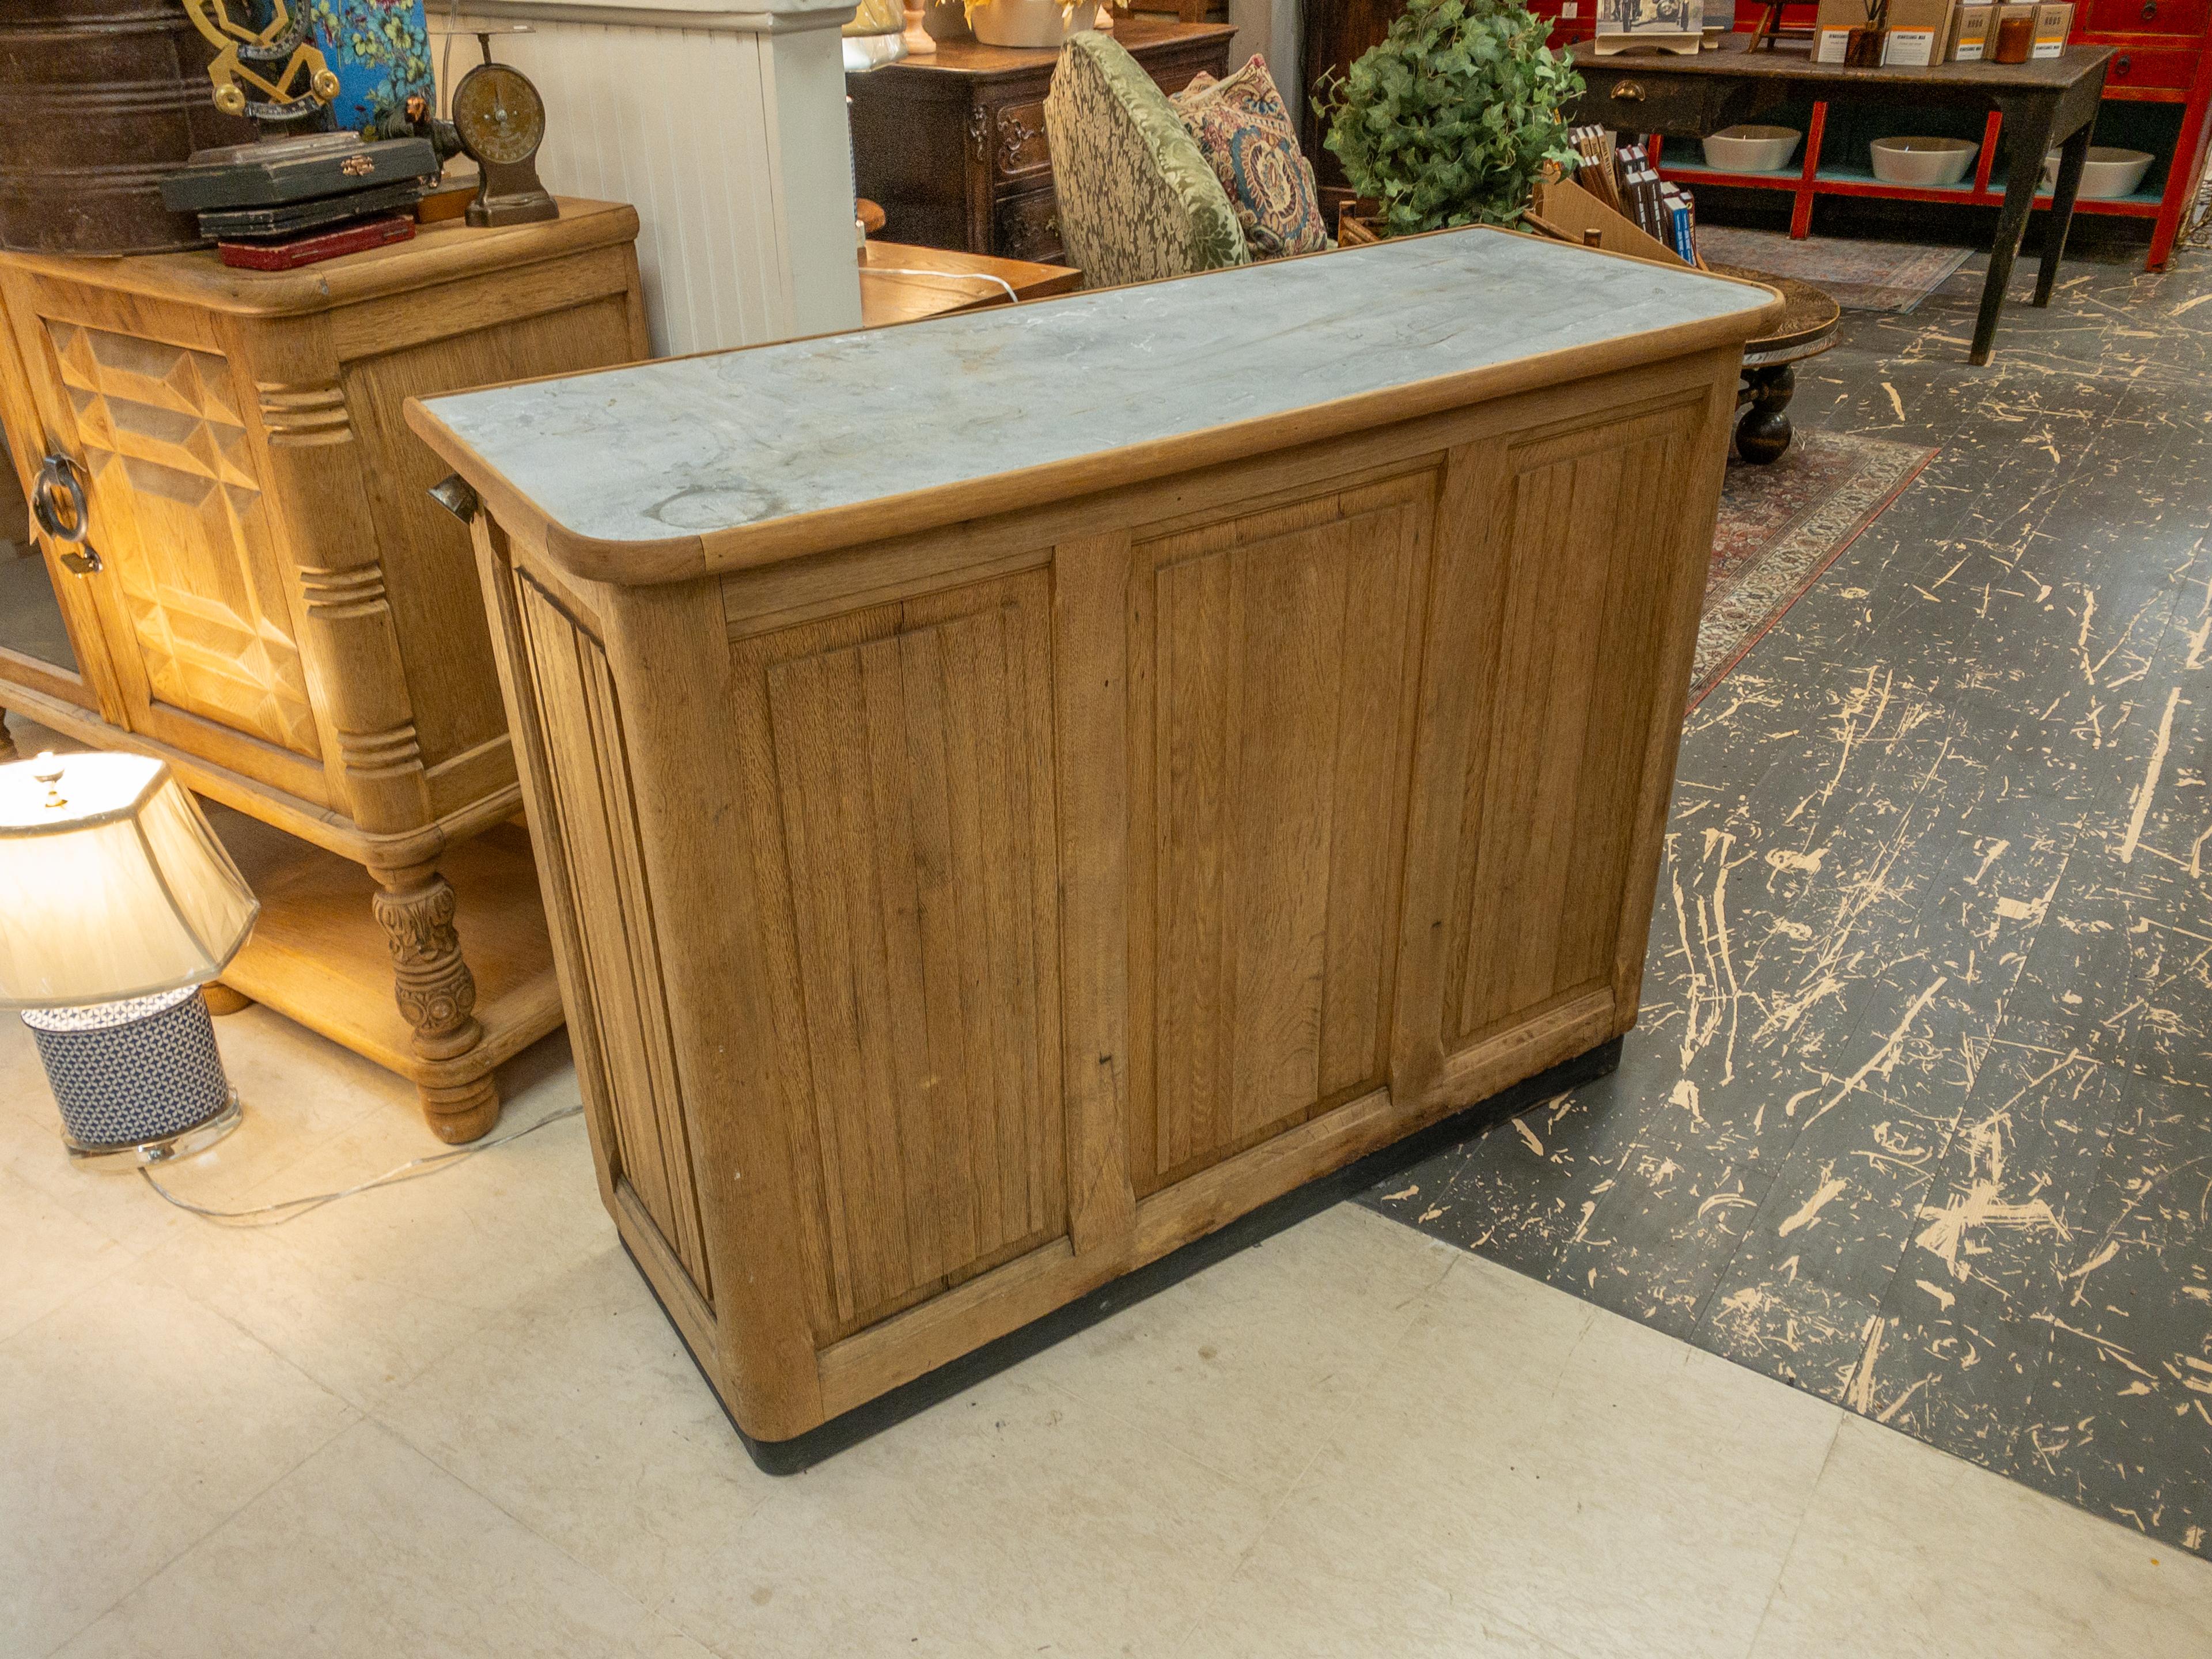 The 19th Century French Oak Counter exudes timeless charm with its rich history and elegant craftsmanship. Standing proudly with a sturdy oak frame, it boasts a metal top, adding a touch of industrial sophistication. Behind the counter, a single